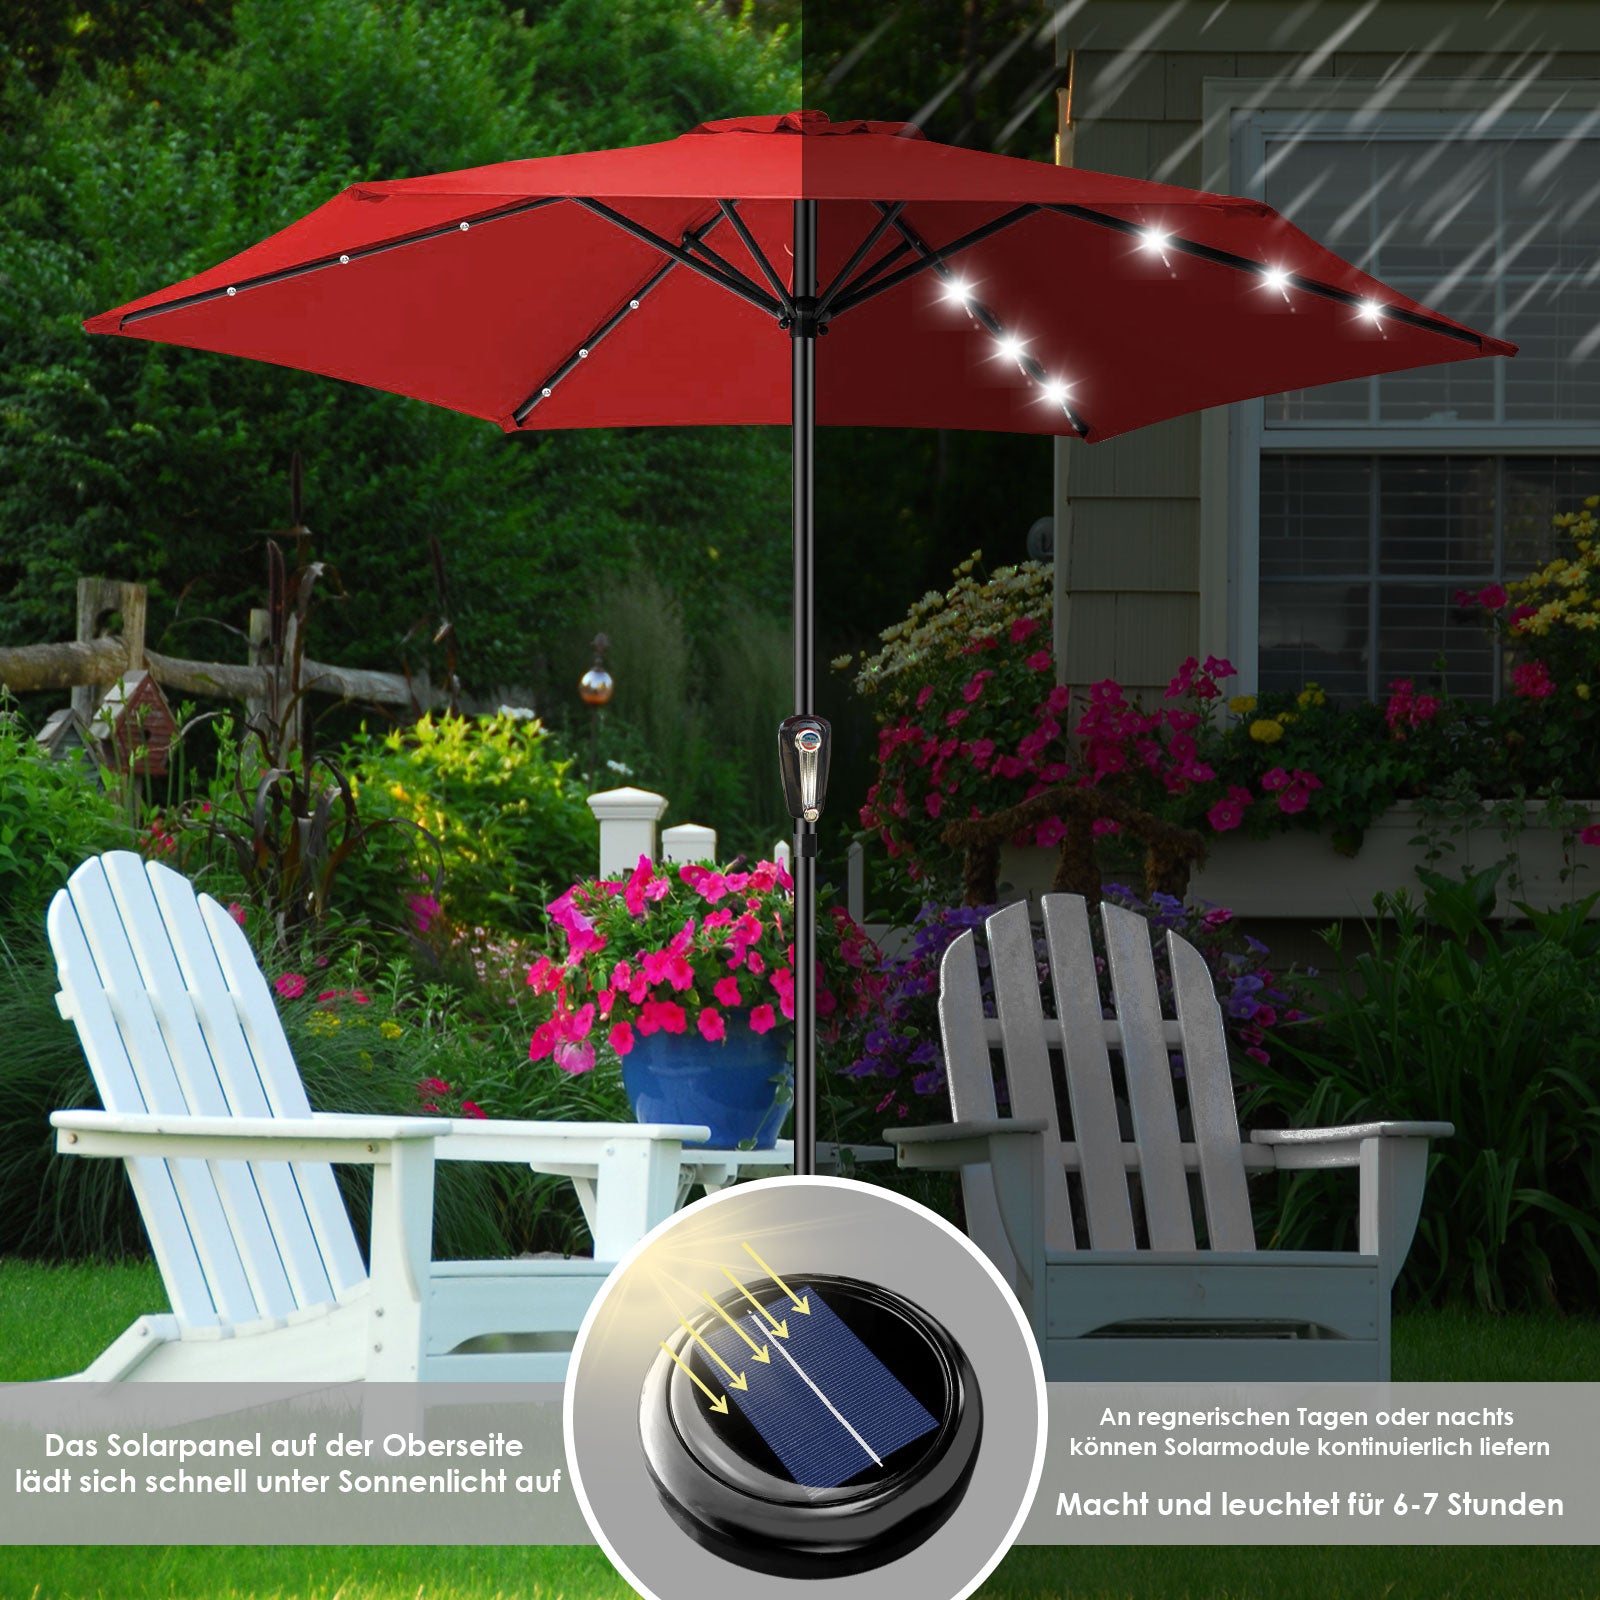 10ft Mastertop Solar LED Lighting Patio Umbrella - Large Solar-Powered Outdoor Parasols with Tilt Adjustment and Crank Lift System, 6 Sturdy Iron Ribs, 18 Lights - Perfect for Party, Festival, Yard, Pool, Commerical &amp; Residential Decor